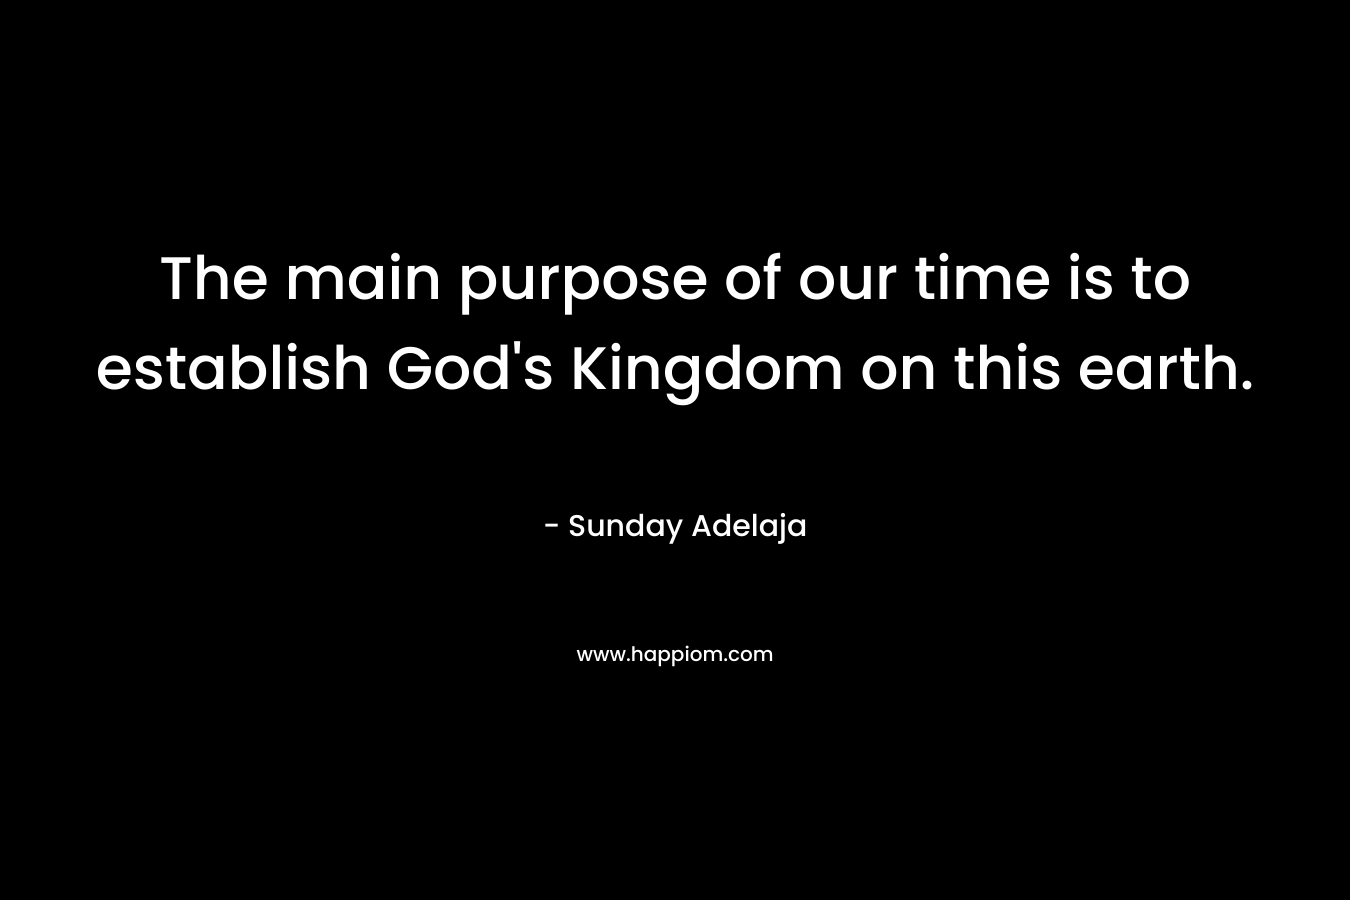 The main purpose of our time is to establish God's Kingdom on this earth.